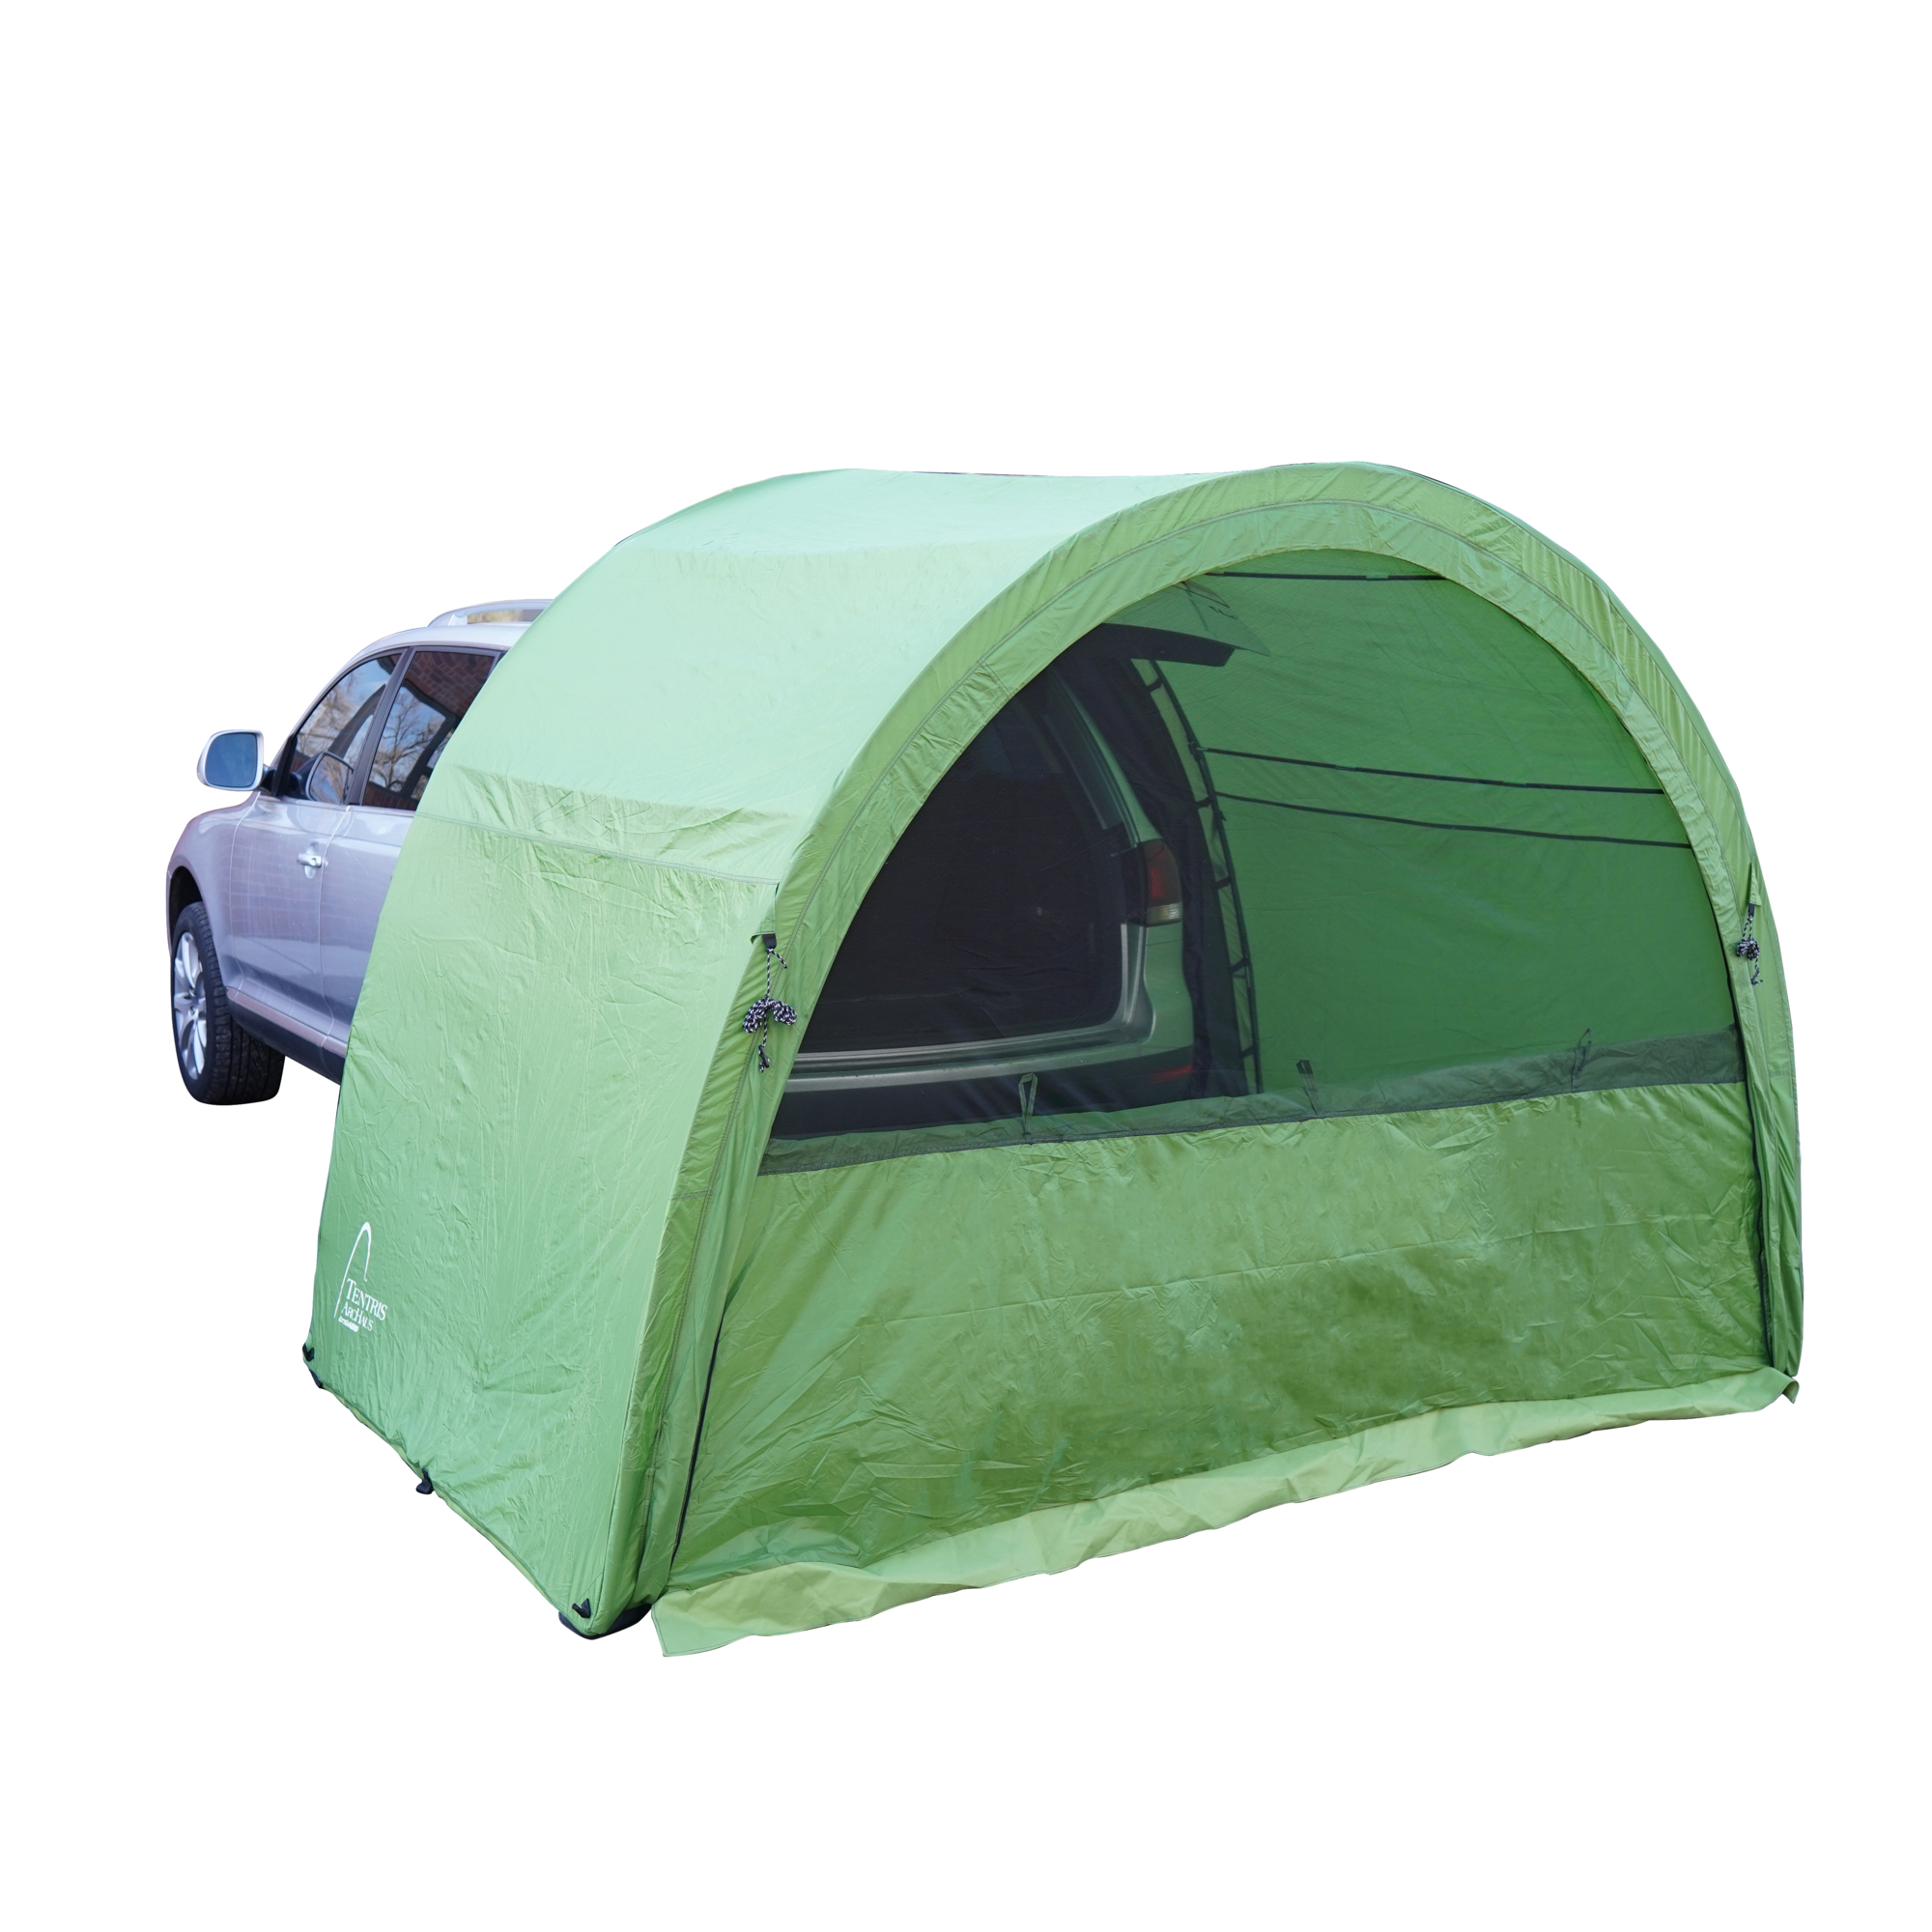 Let's Go Aero, ArcHaus Shelter and Tailgate Tent, Length 10 ft, Width 6 ft, Color Green, Model ARC00406